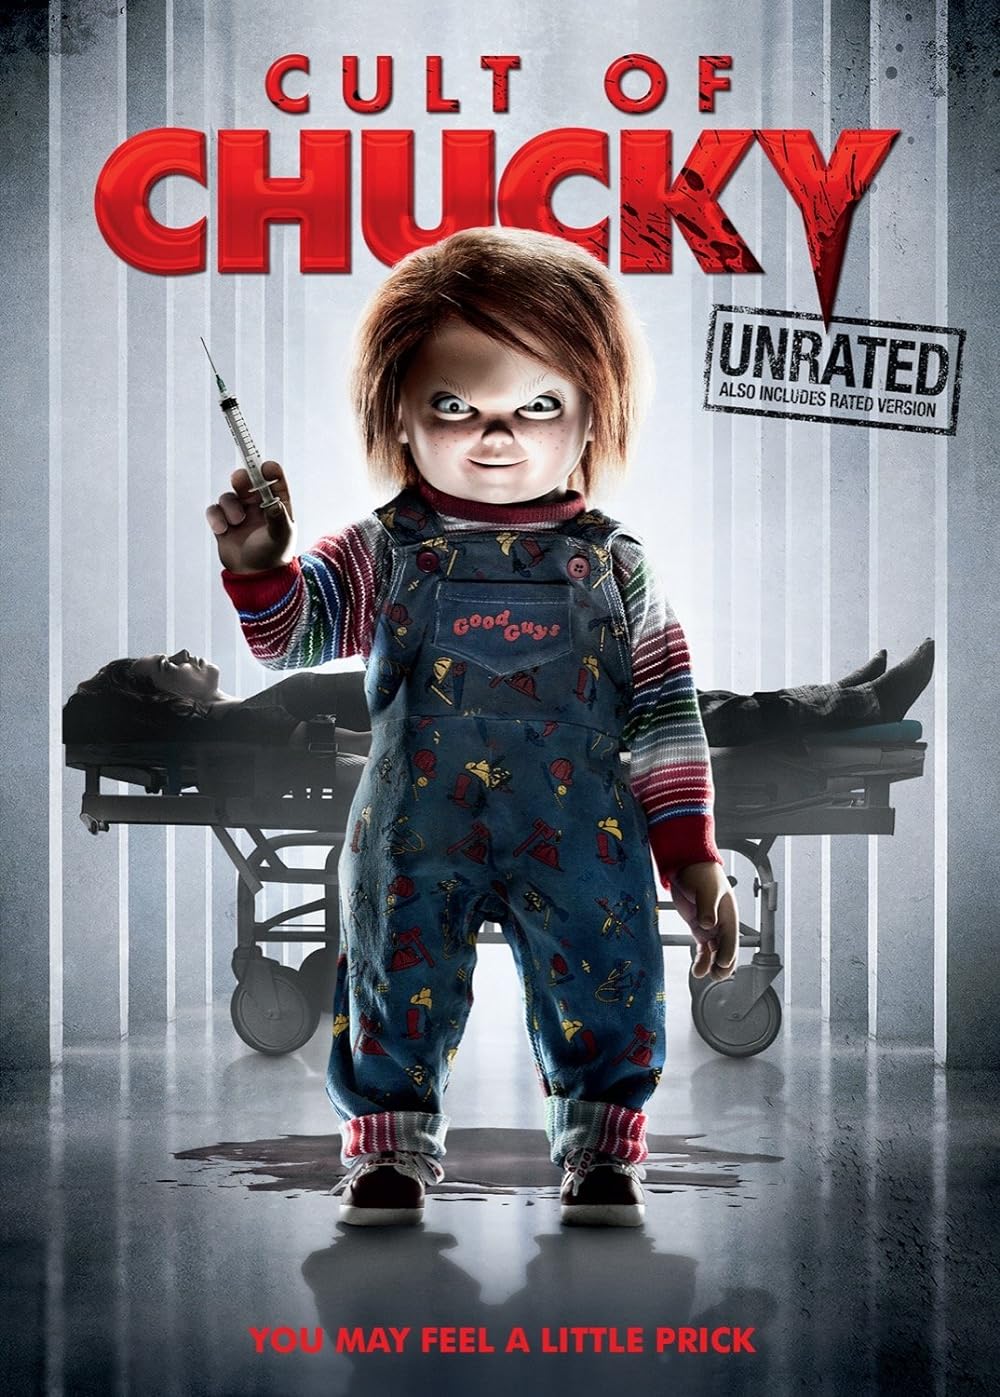 Cult of Chucky (2017) Unrated Cut 640Kbps 23.976Fps 48Khz 5.1Ch DD+ NF E-AC3 Turkish Audio TAC